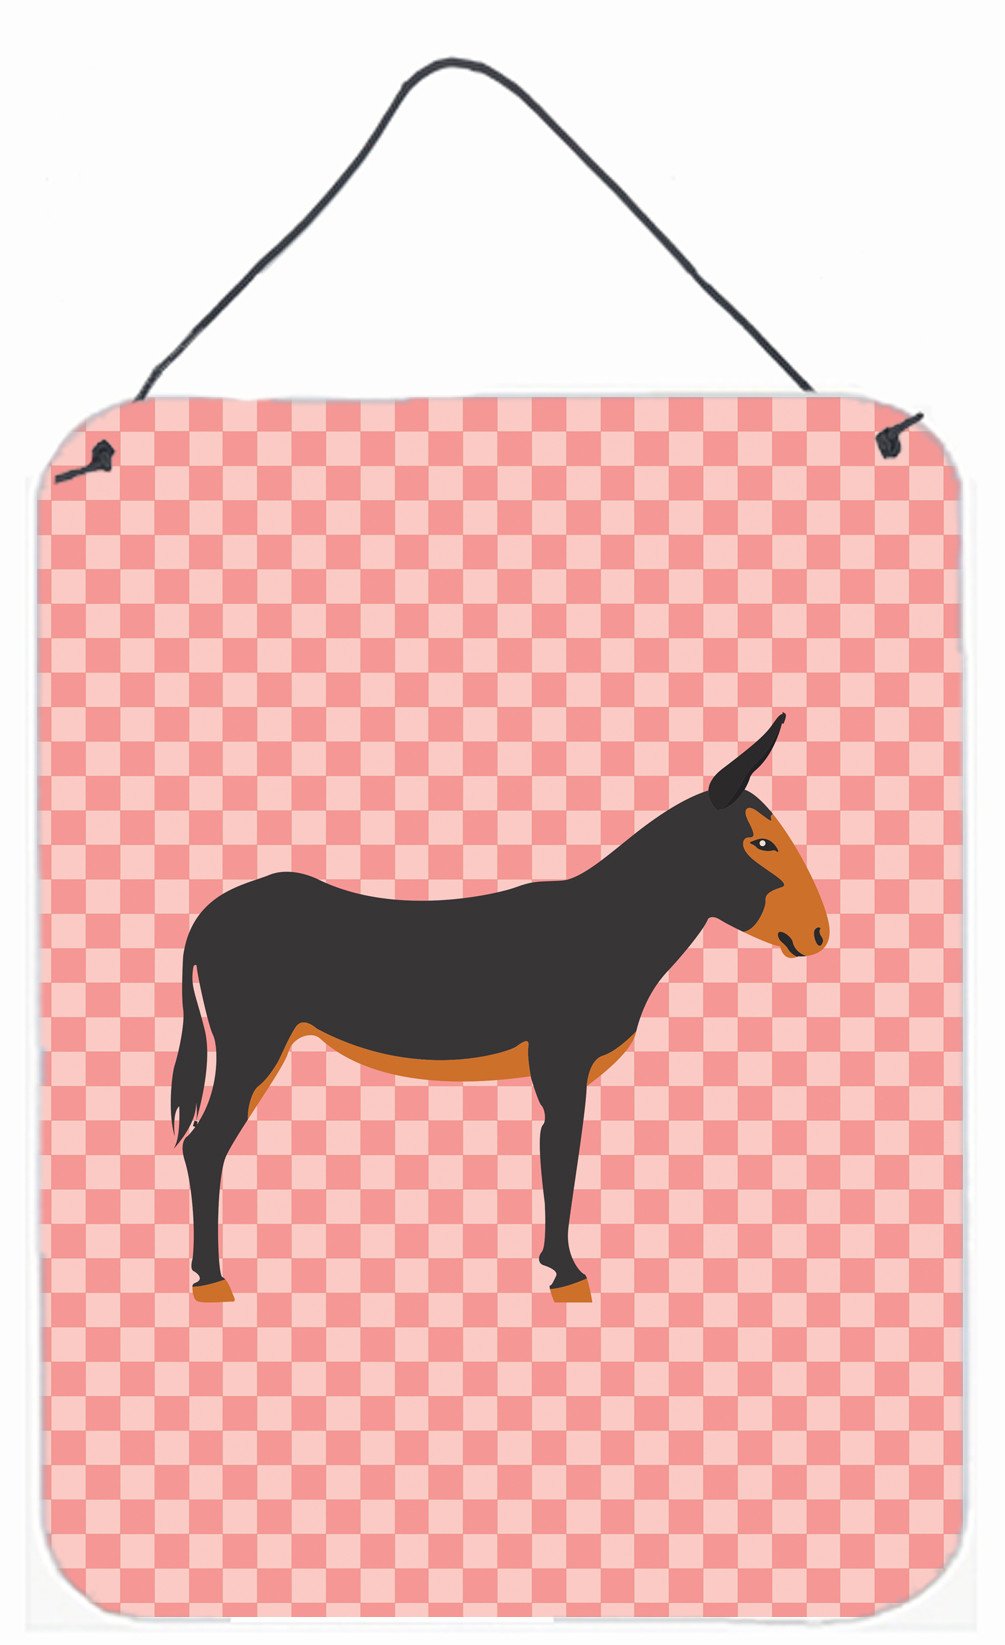 Catalan Donkey Pink Check Wall or Door Hanging Prints BB7855DS1216 by Caroline's Treasures